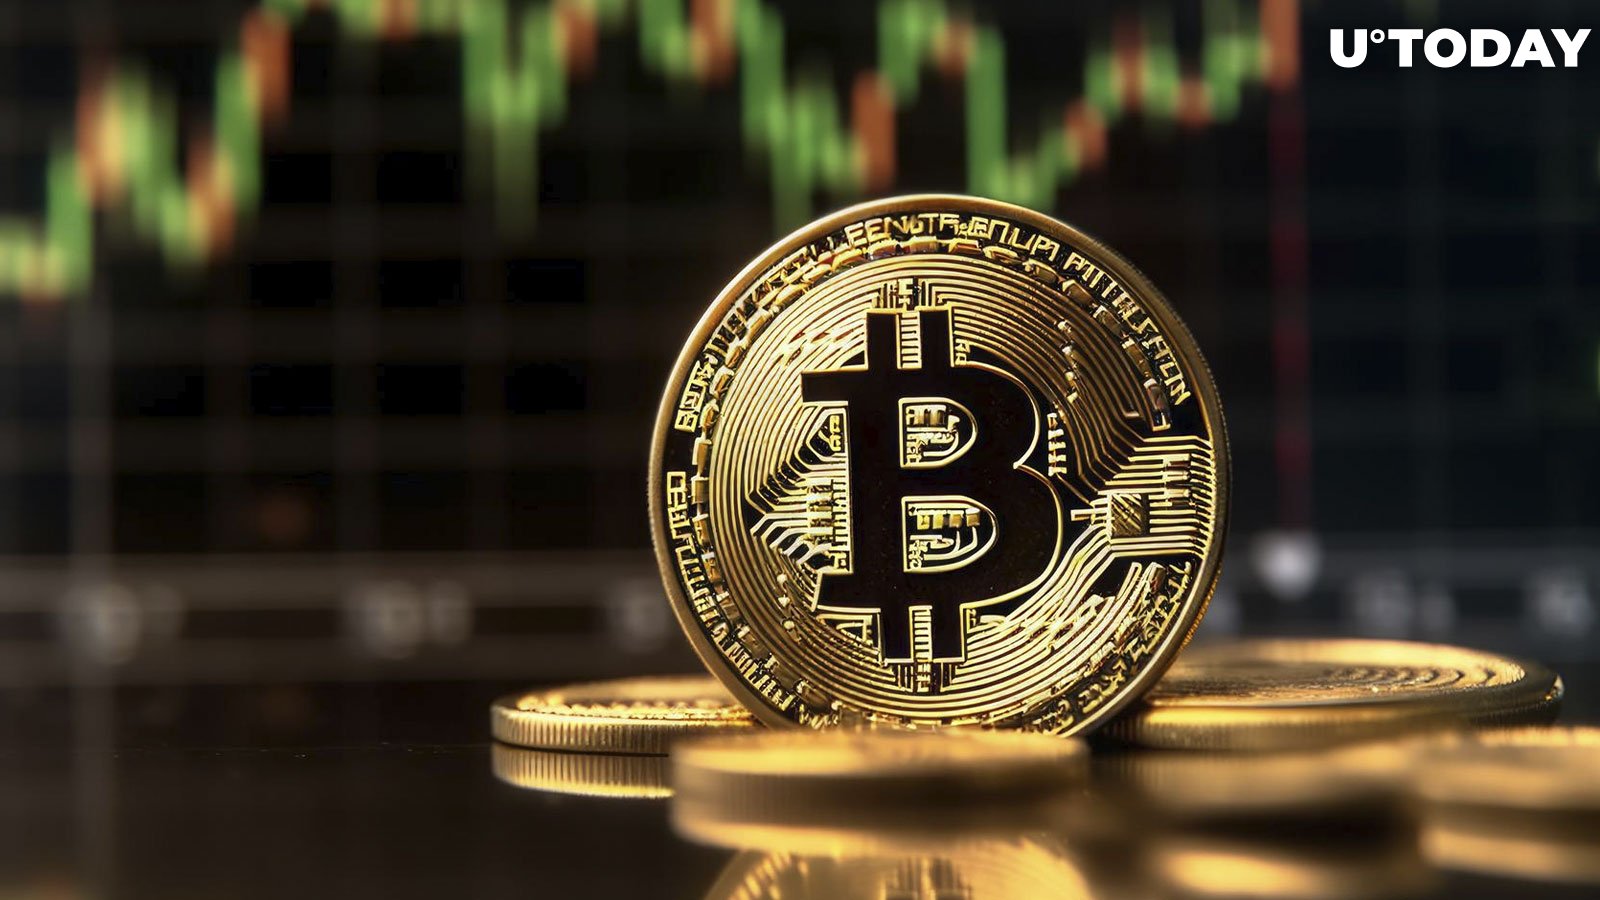  Bitcoin (BTC) Price Might Be on Track to Hit $75,000, but There's Key Resistance